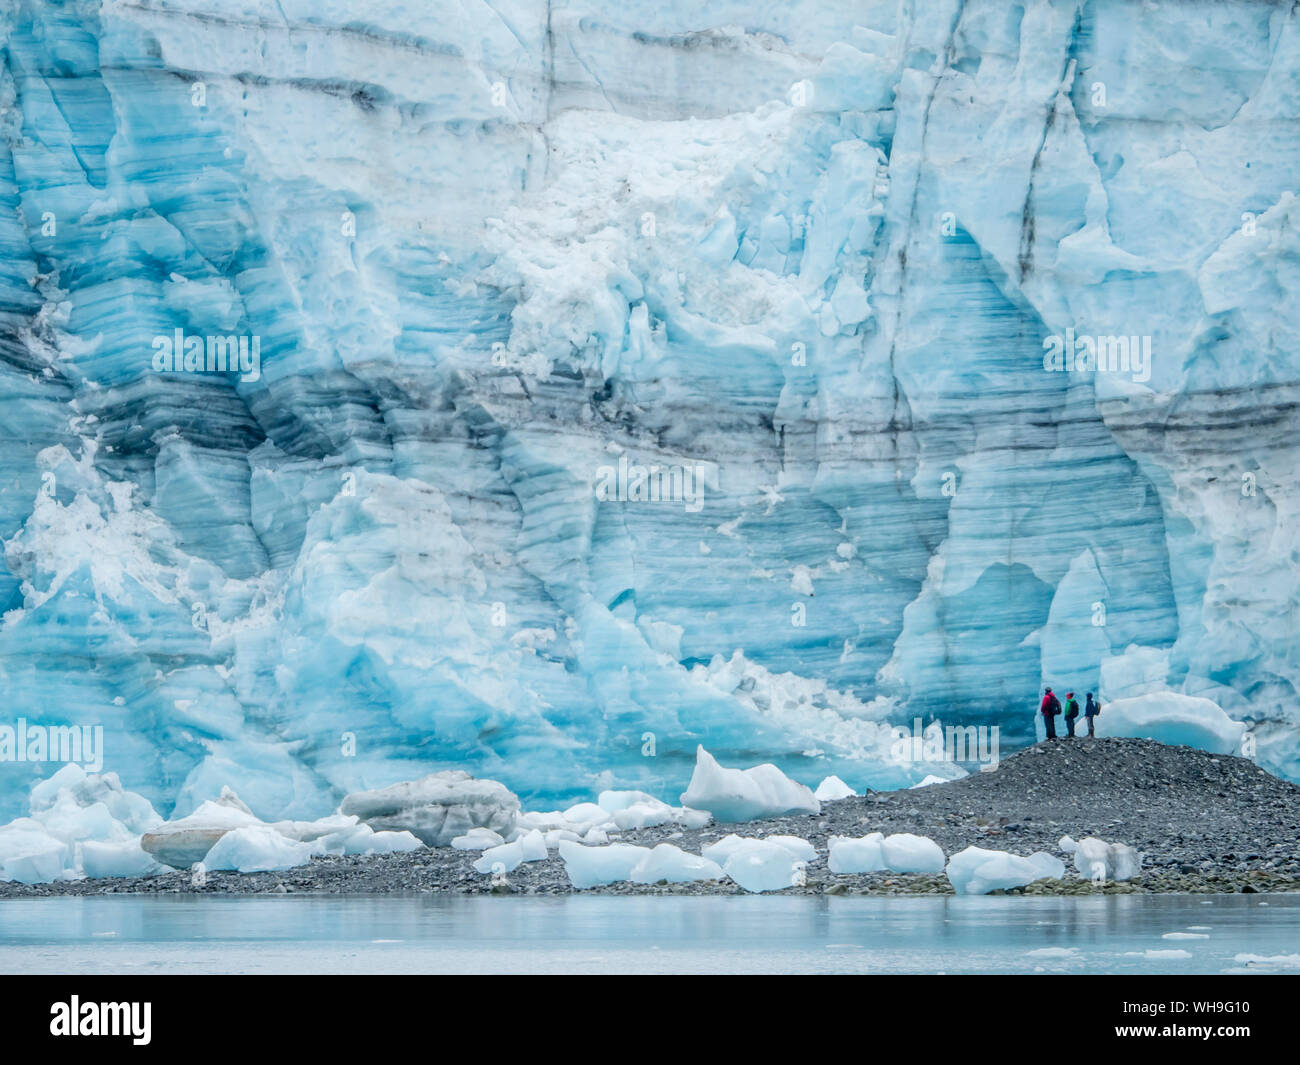 Hikers in front of Lamplugh Glacier, Glacier Bay National Park and Preserve, UNESCO World Heritage Site, Alaska, United States of America Stock Photo